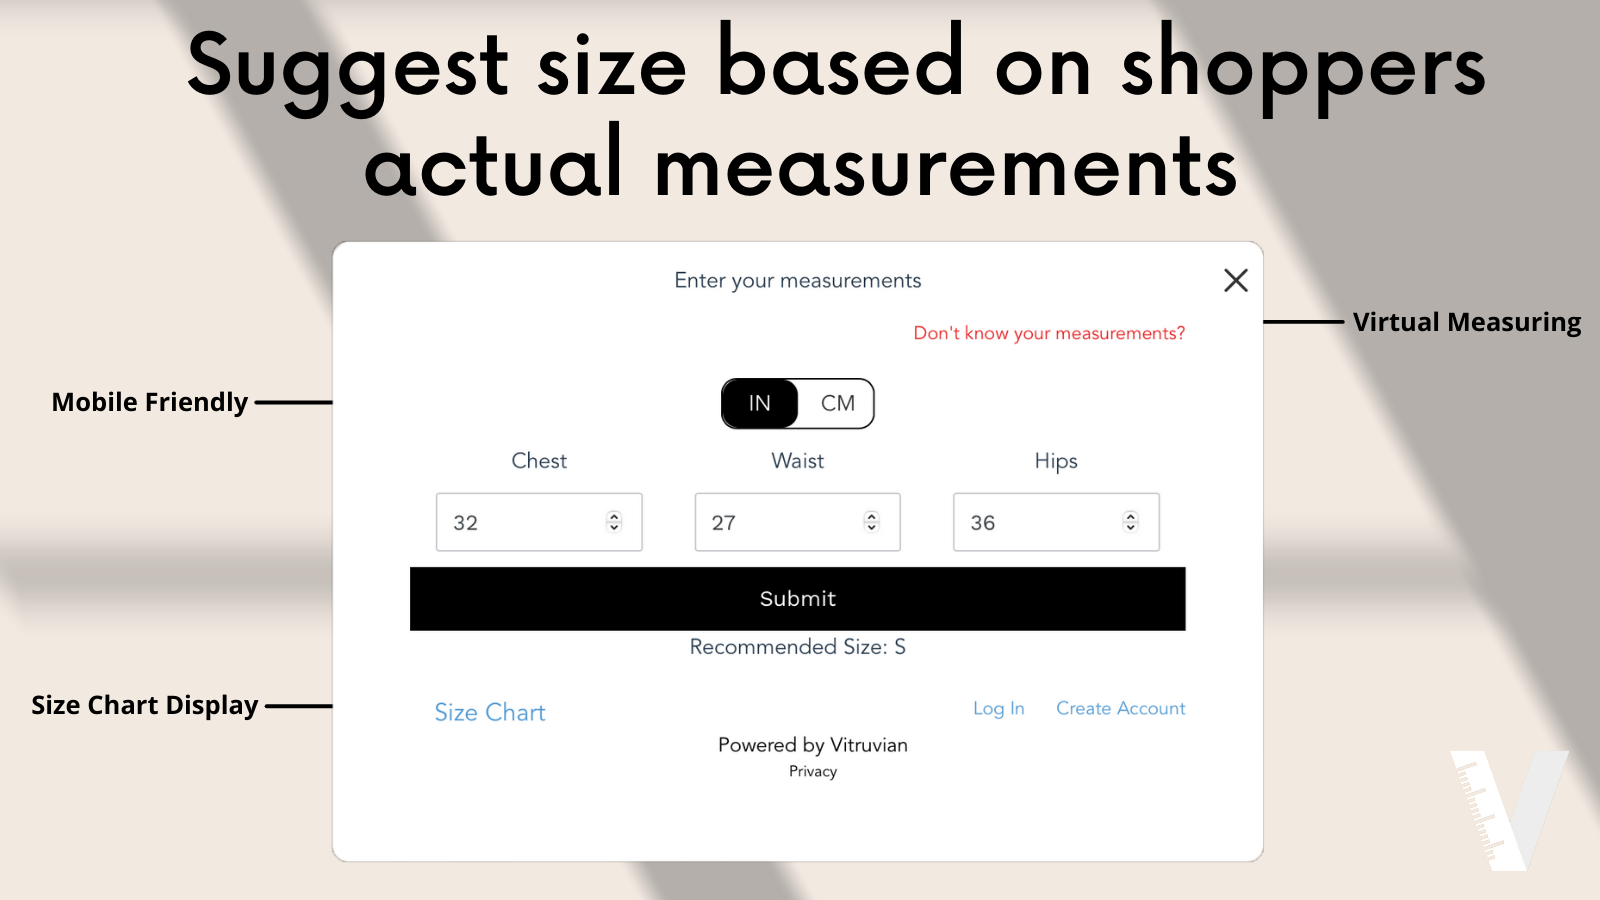 Shoppers get suggested a size based on their actual measurements